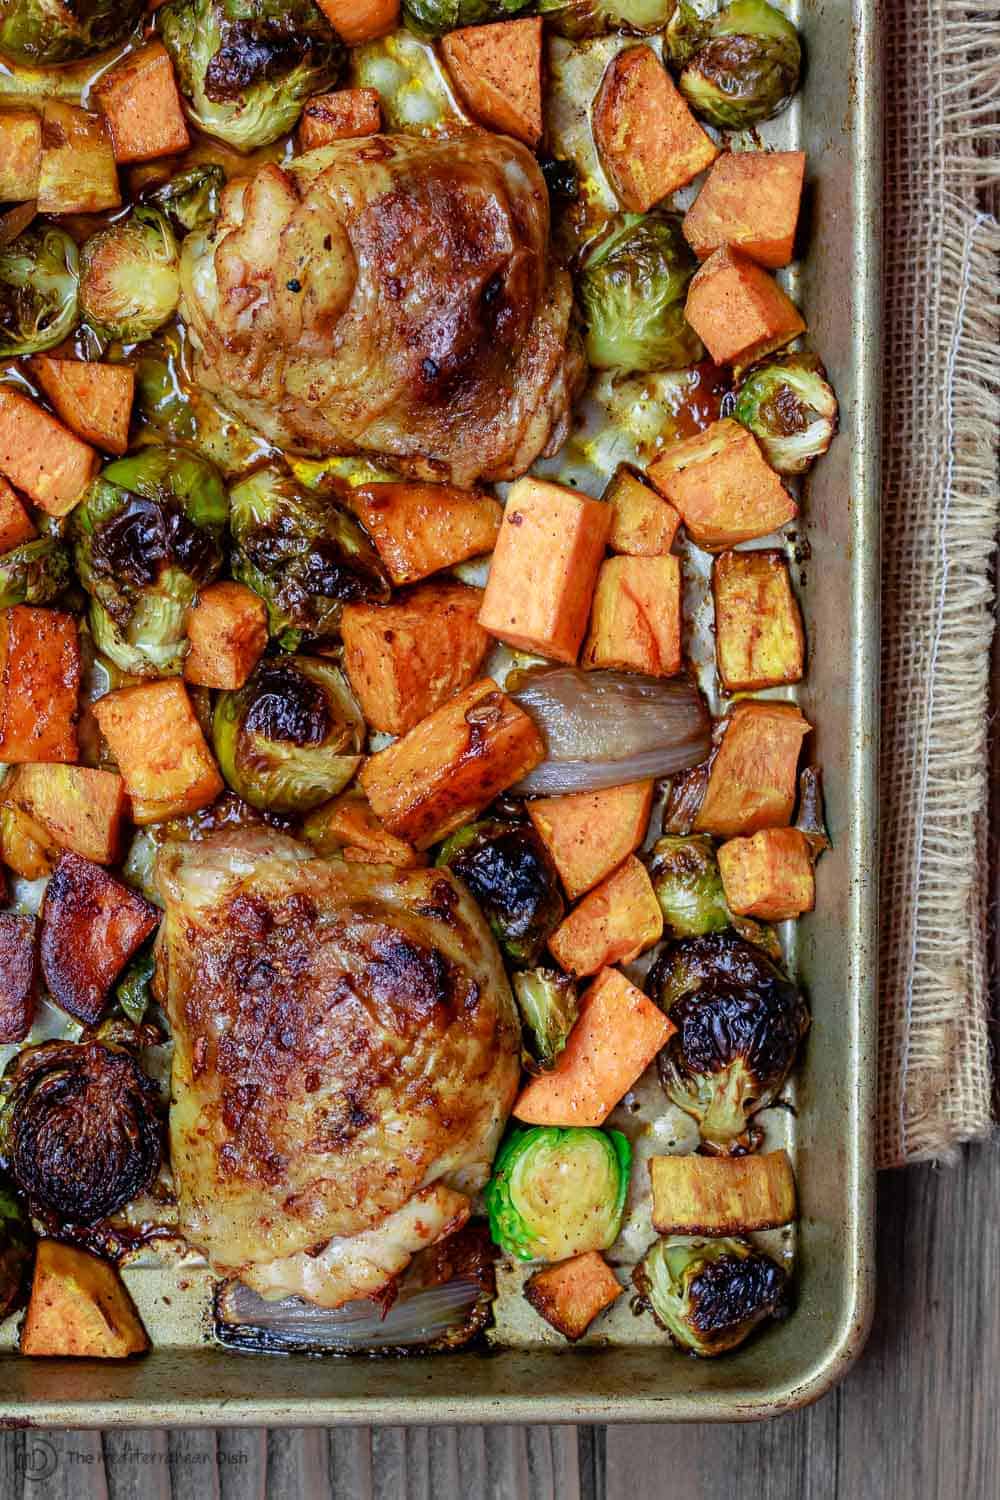 Sheet Pan Paprika Chicken and Vegetables | The Mediterranean Dish. This paprika chicken is never a hard sell at my house! Easy, flavor-packed sheet pan chicken with brussels sprouts and sweet potatoes. A comforting and healthy recipe for any night of the week! See the full recipe on TheMediterraneanDish.com. #mediterraneanrecipe #mediterraneandiet #paprikachicken #chicken #sheetpandinners #chickendinner #sheetpanchicken